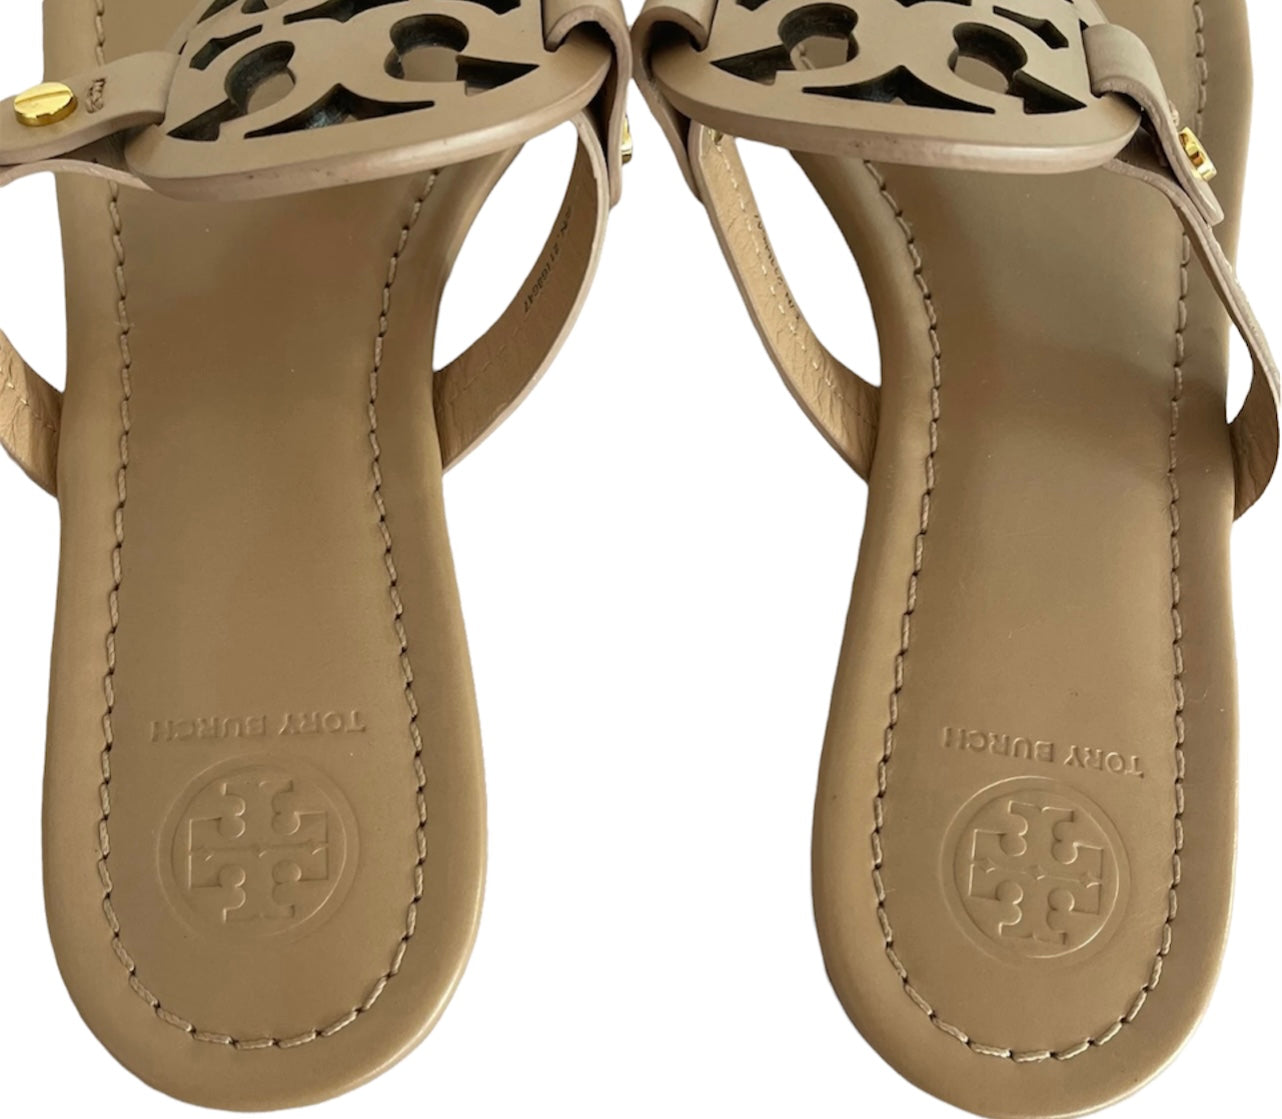 Tory Burch Miller Calf Leather Sandals – Midtown Authentic Wyckoff